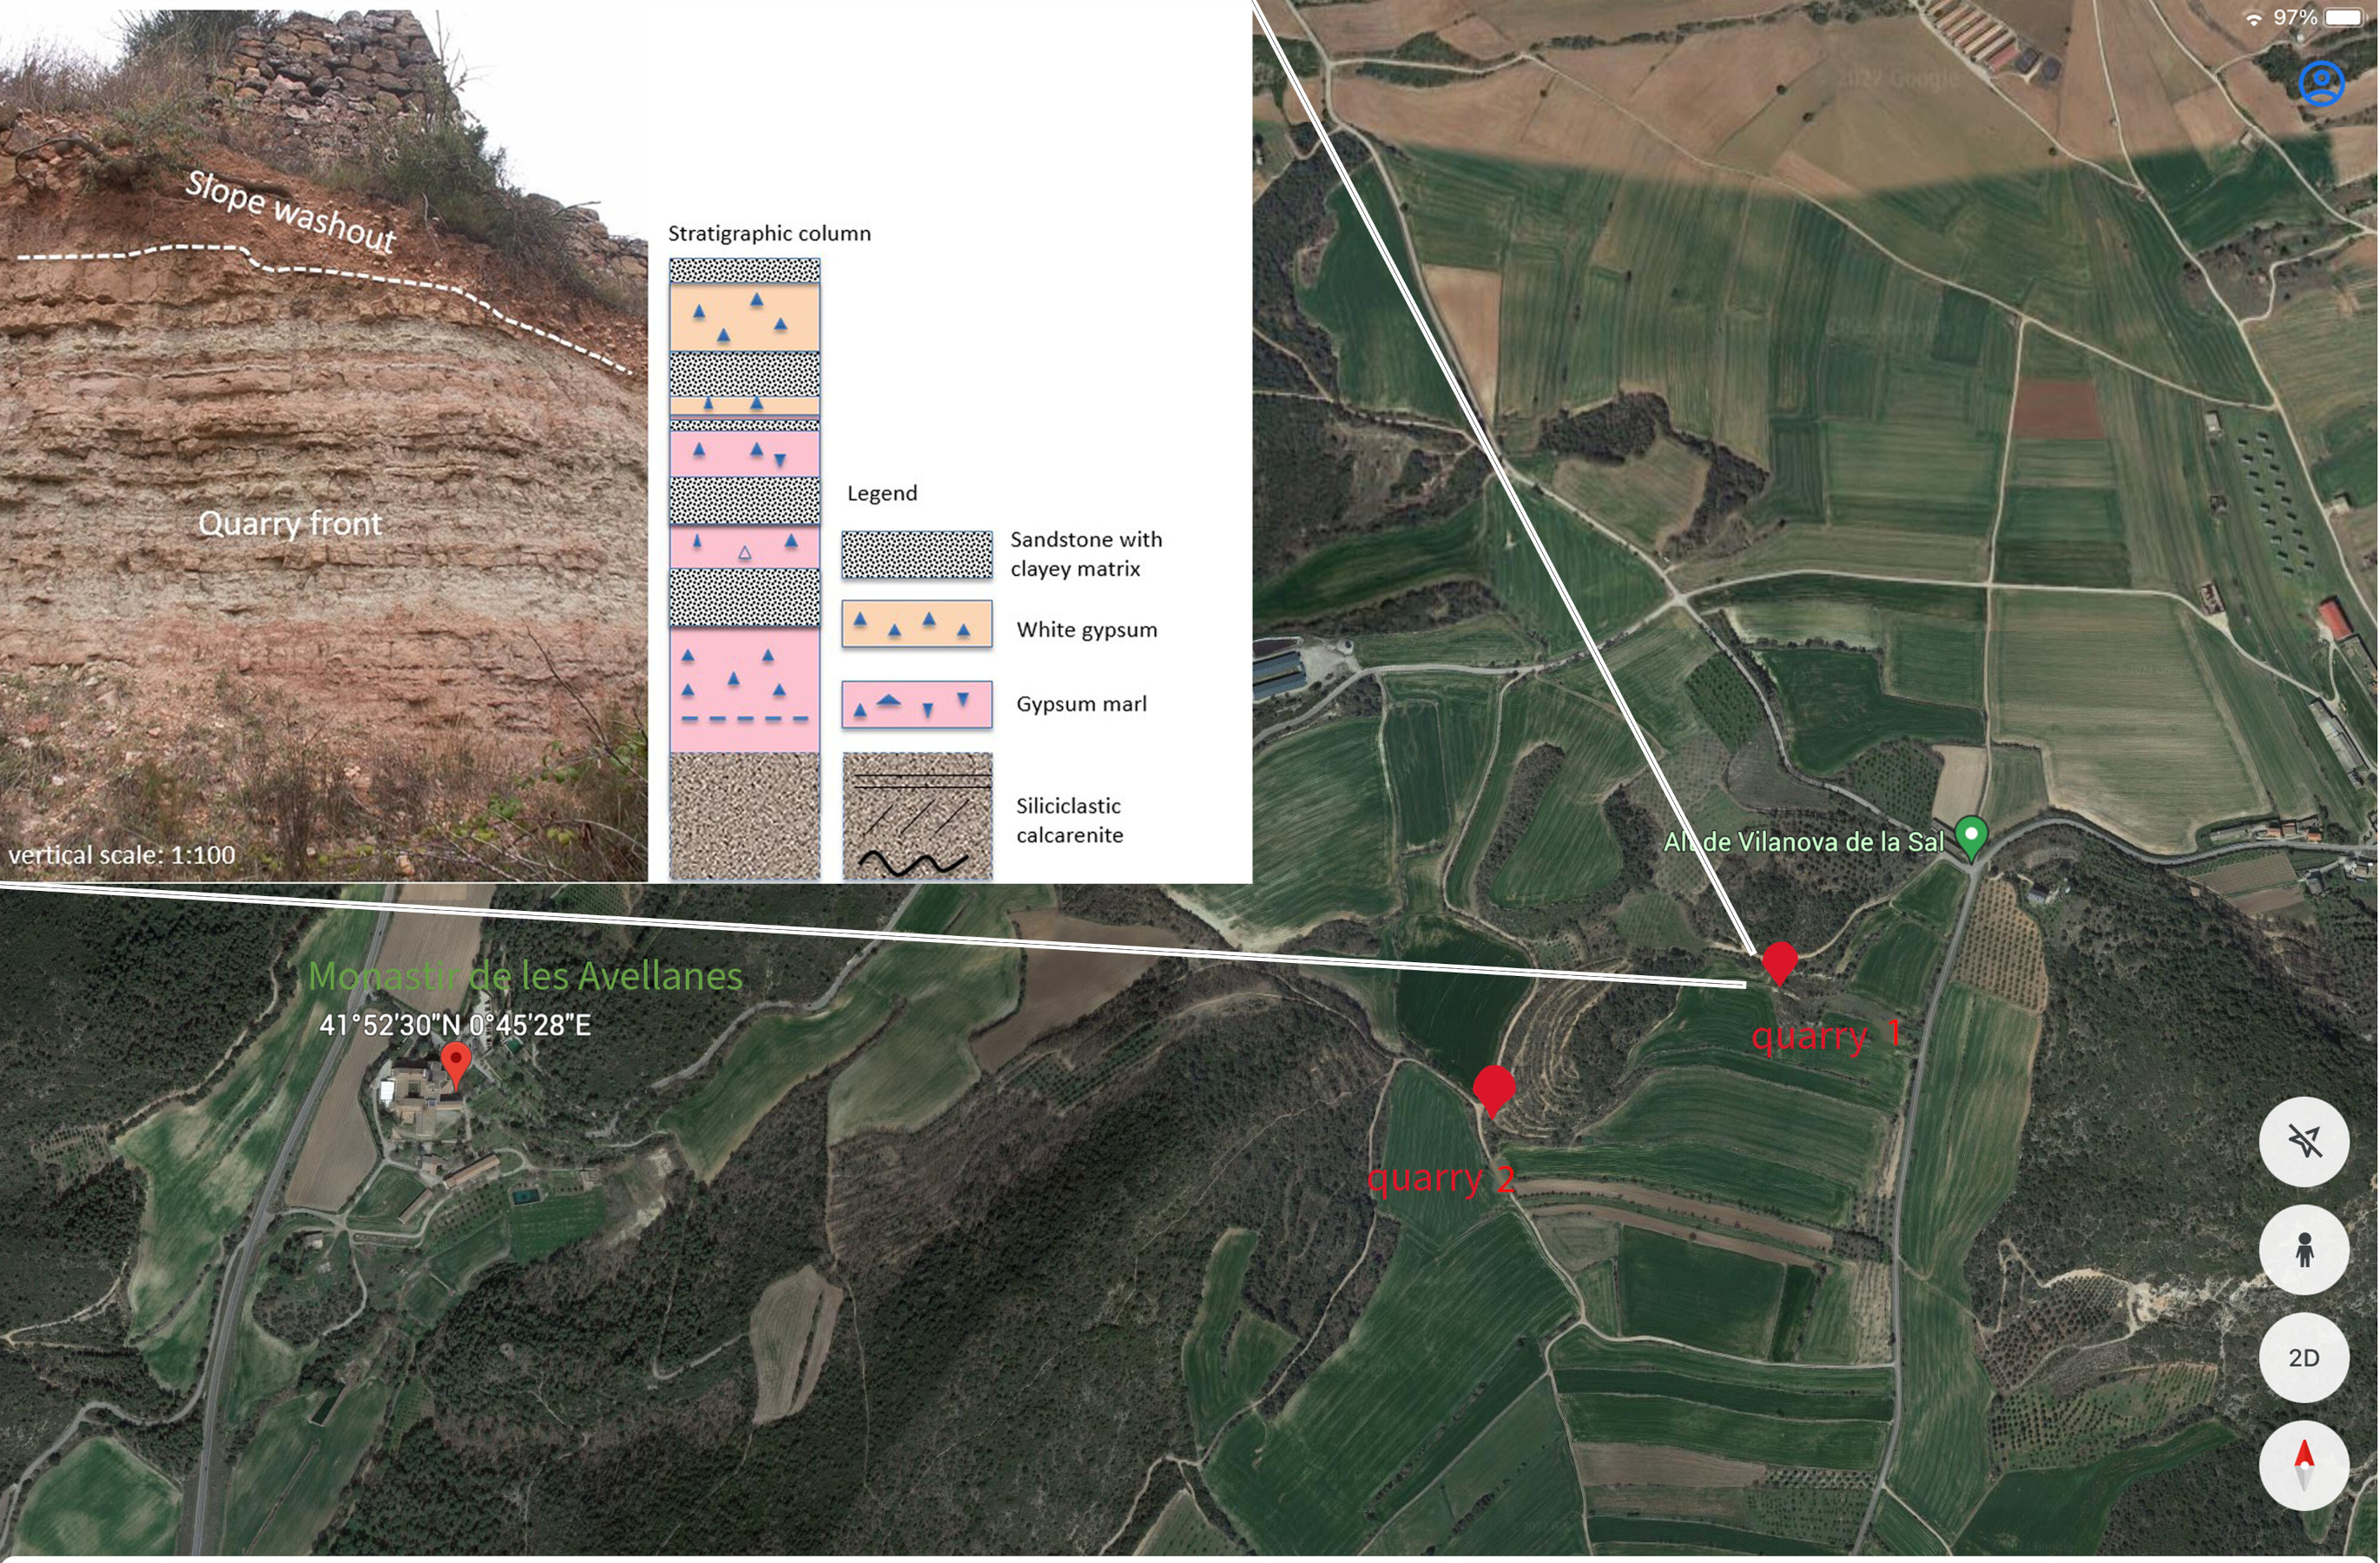 Google earth view of grounds surrounding the monastery of Les Avellanes with locations of two quarries marked with red dots. Graphic inset to the upper left showing the stratigraphic geological column of one quarry.